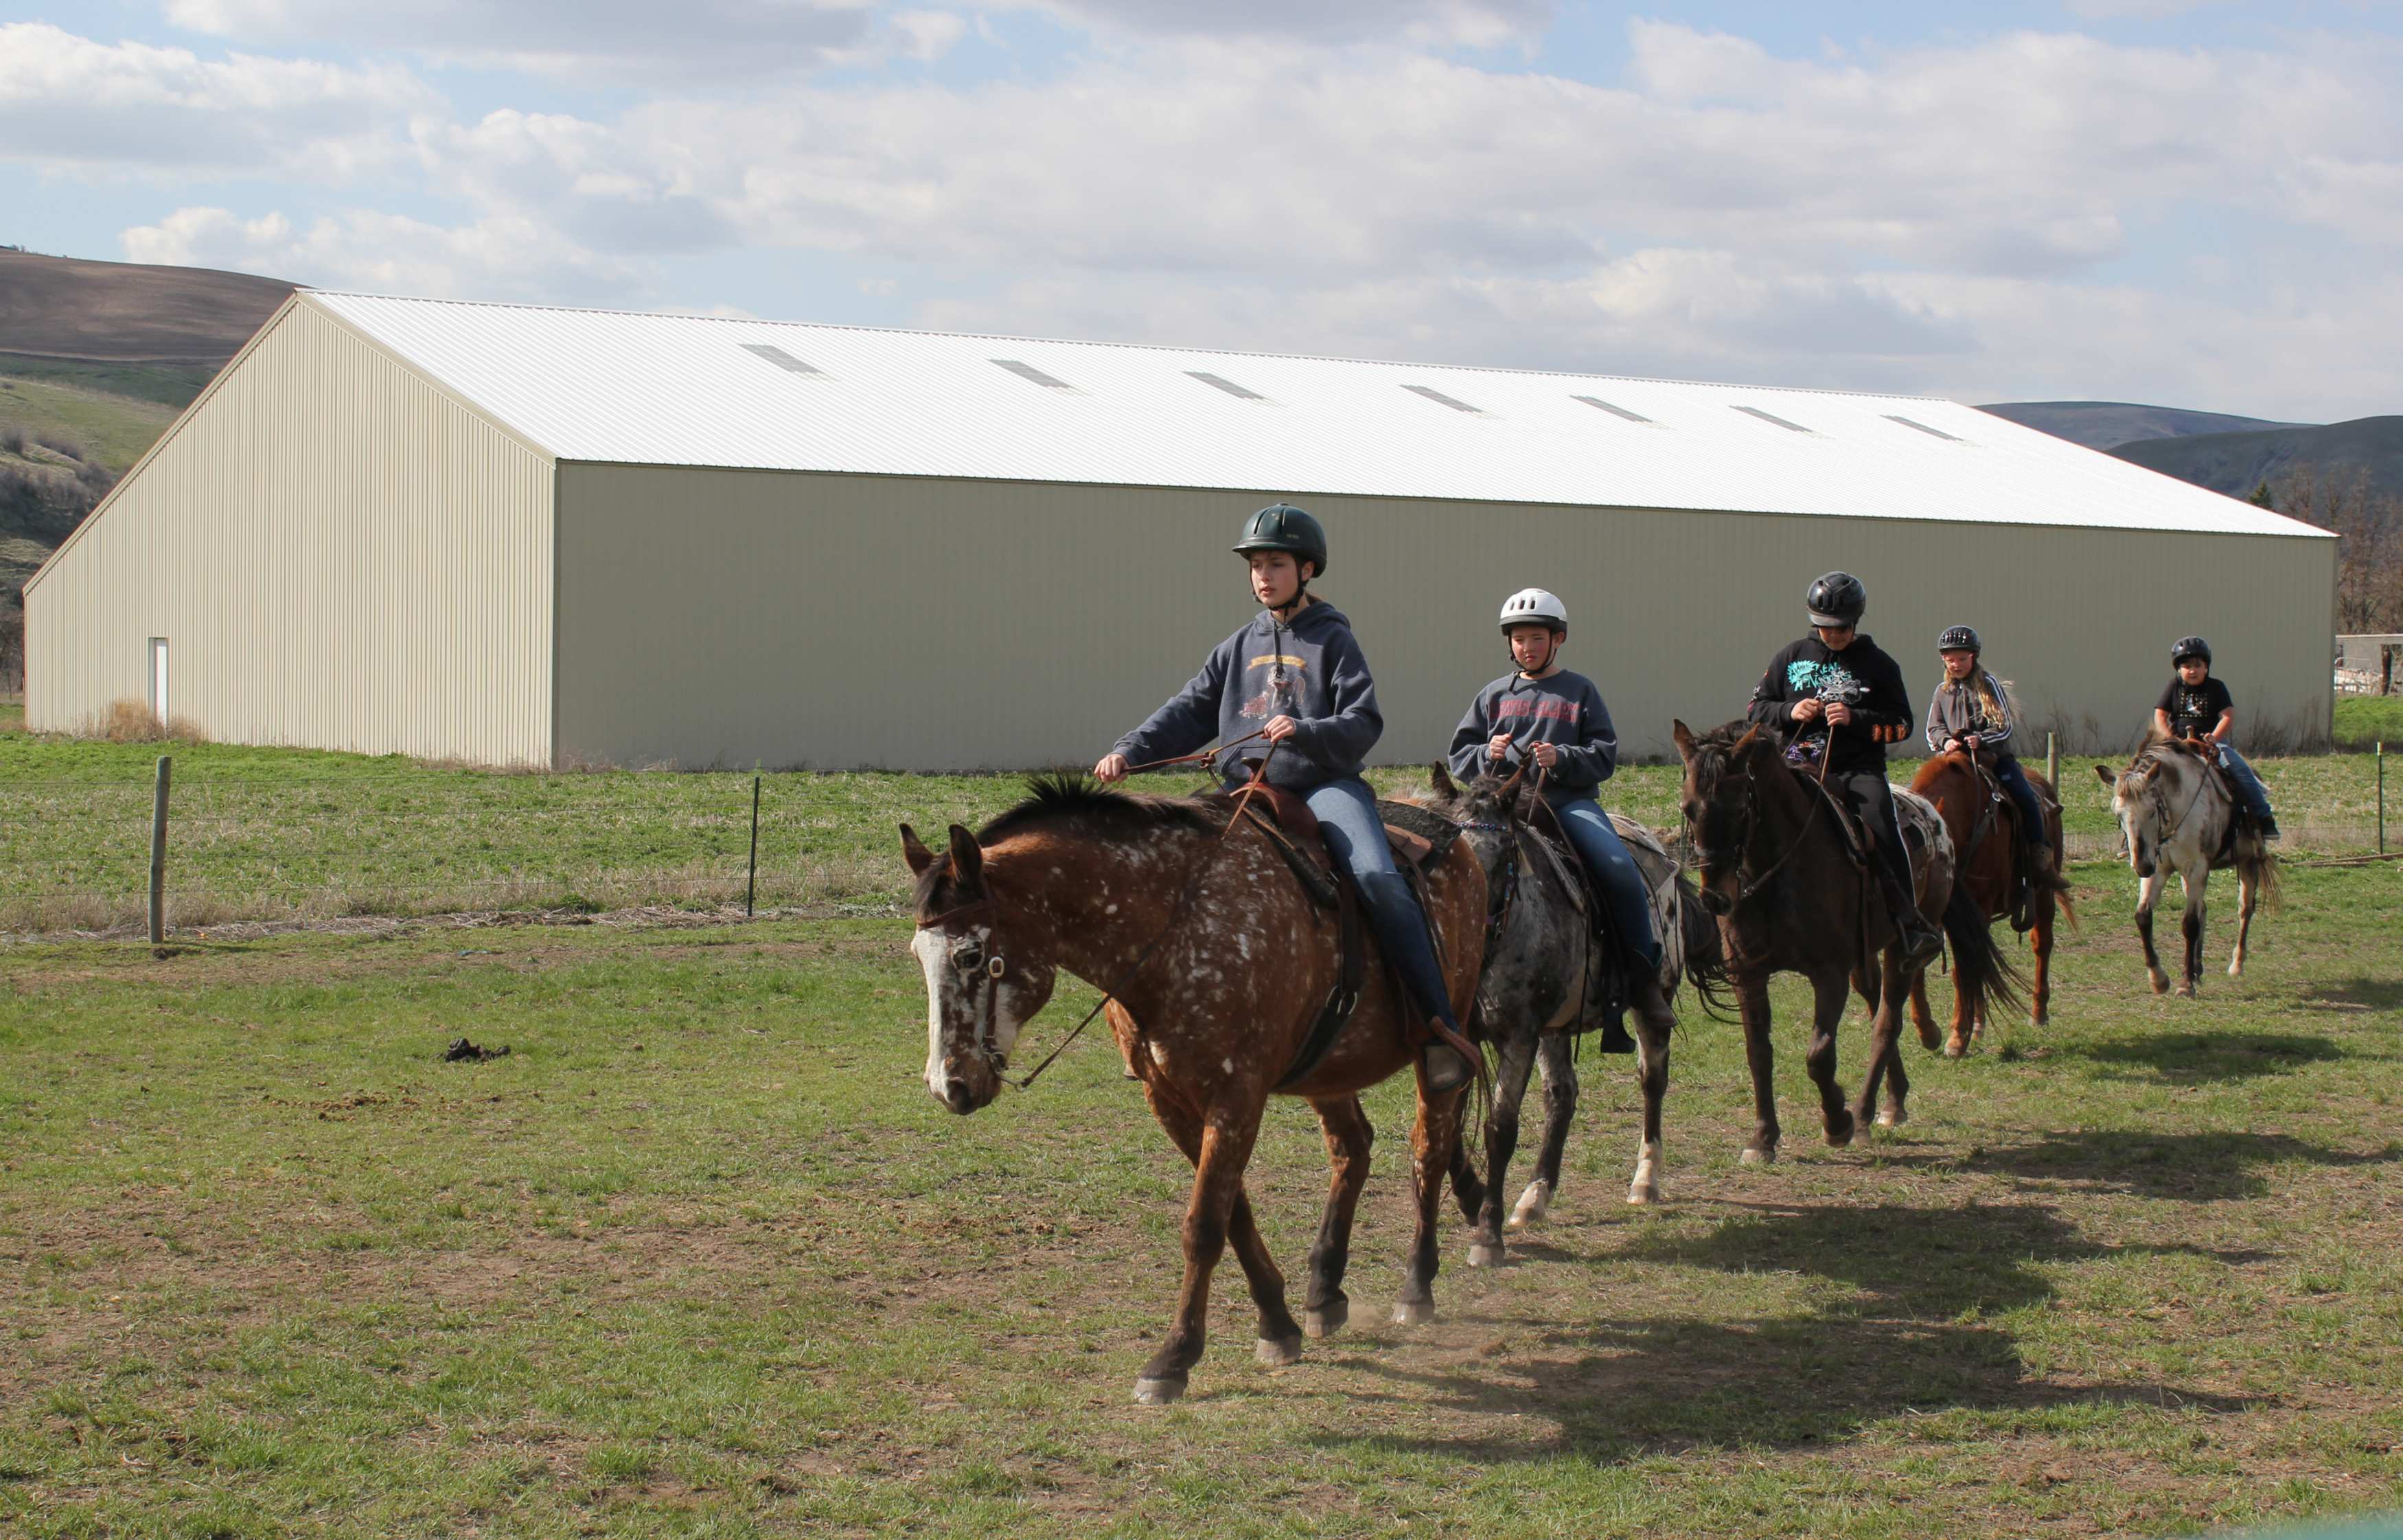 Five Appaloosa horses with riders on them by a white riding facility.